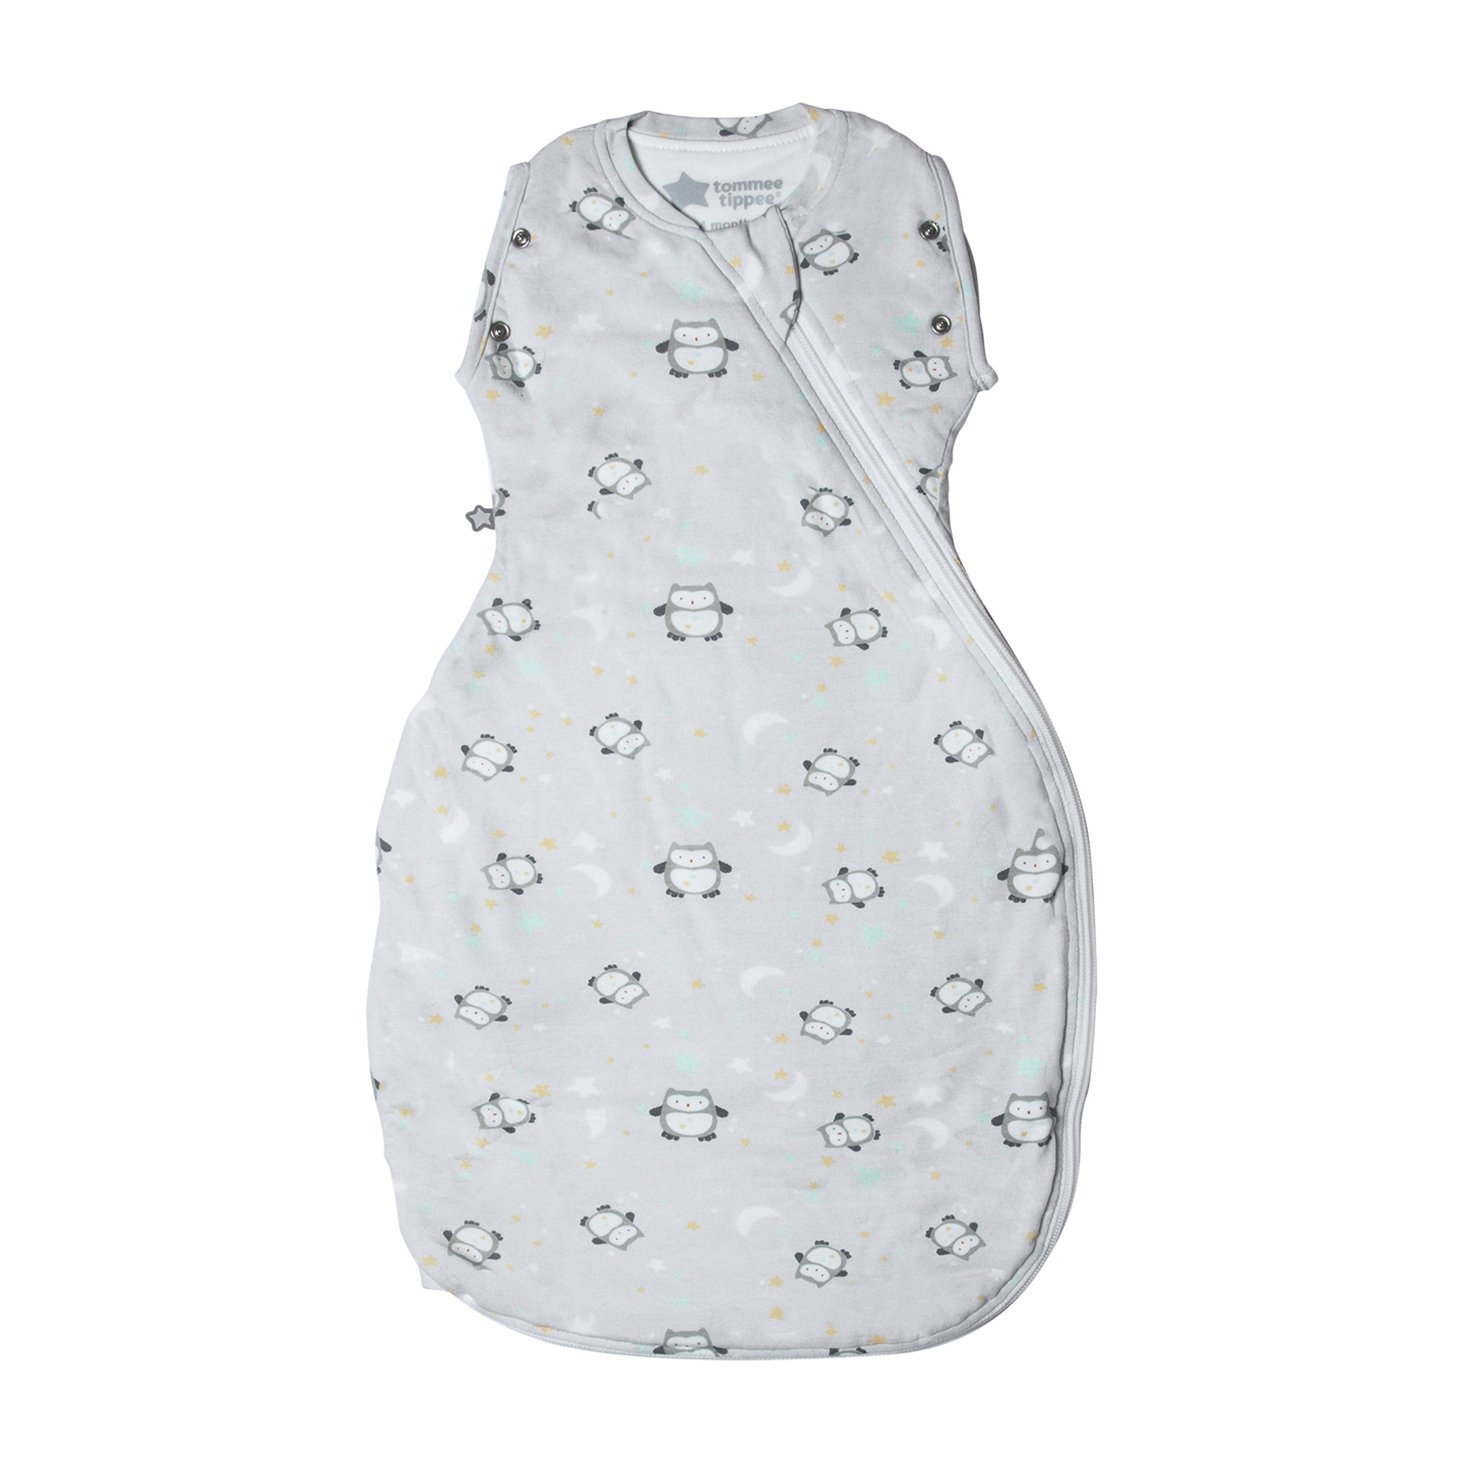 Tommee Tippee Newborn Snuggle, 0-4m, 1.0 Tog, Little Ollie Review